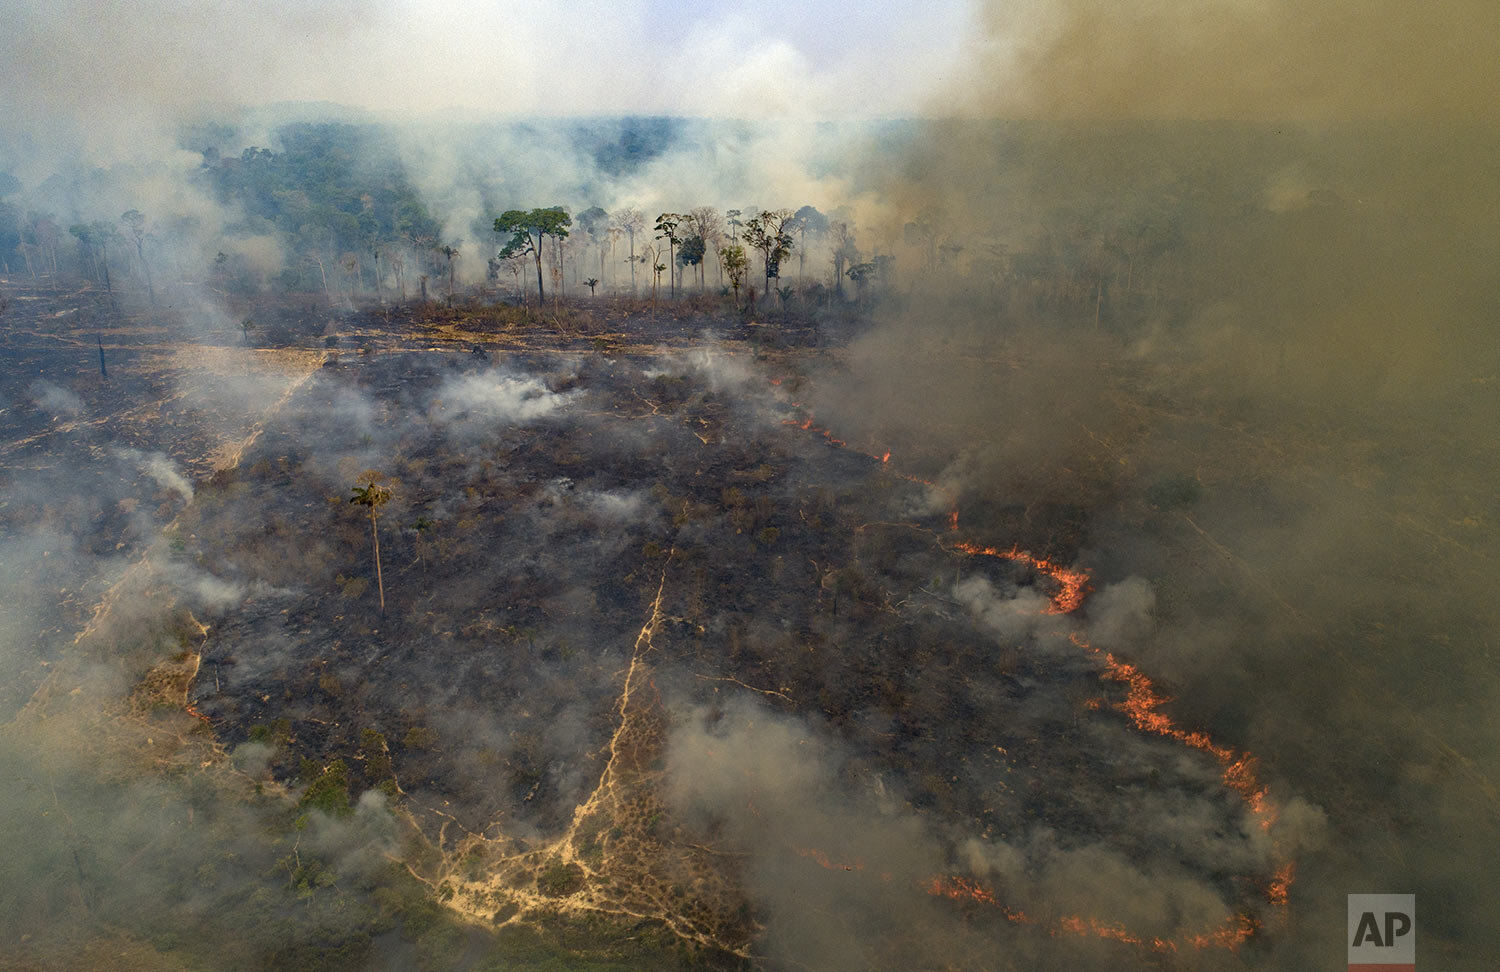  Fire consumes land deforested by cattle farmers near Novo Progresso, Para state, in Brazil’s Amazon, Aug. 23, 2020. (AP Photo/Andre Penner) 